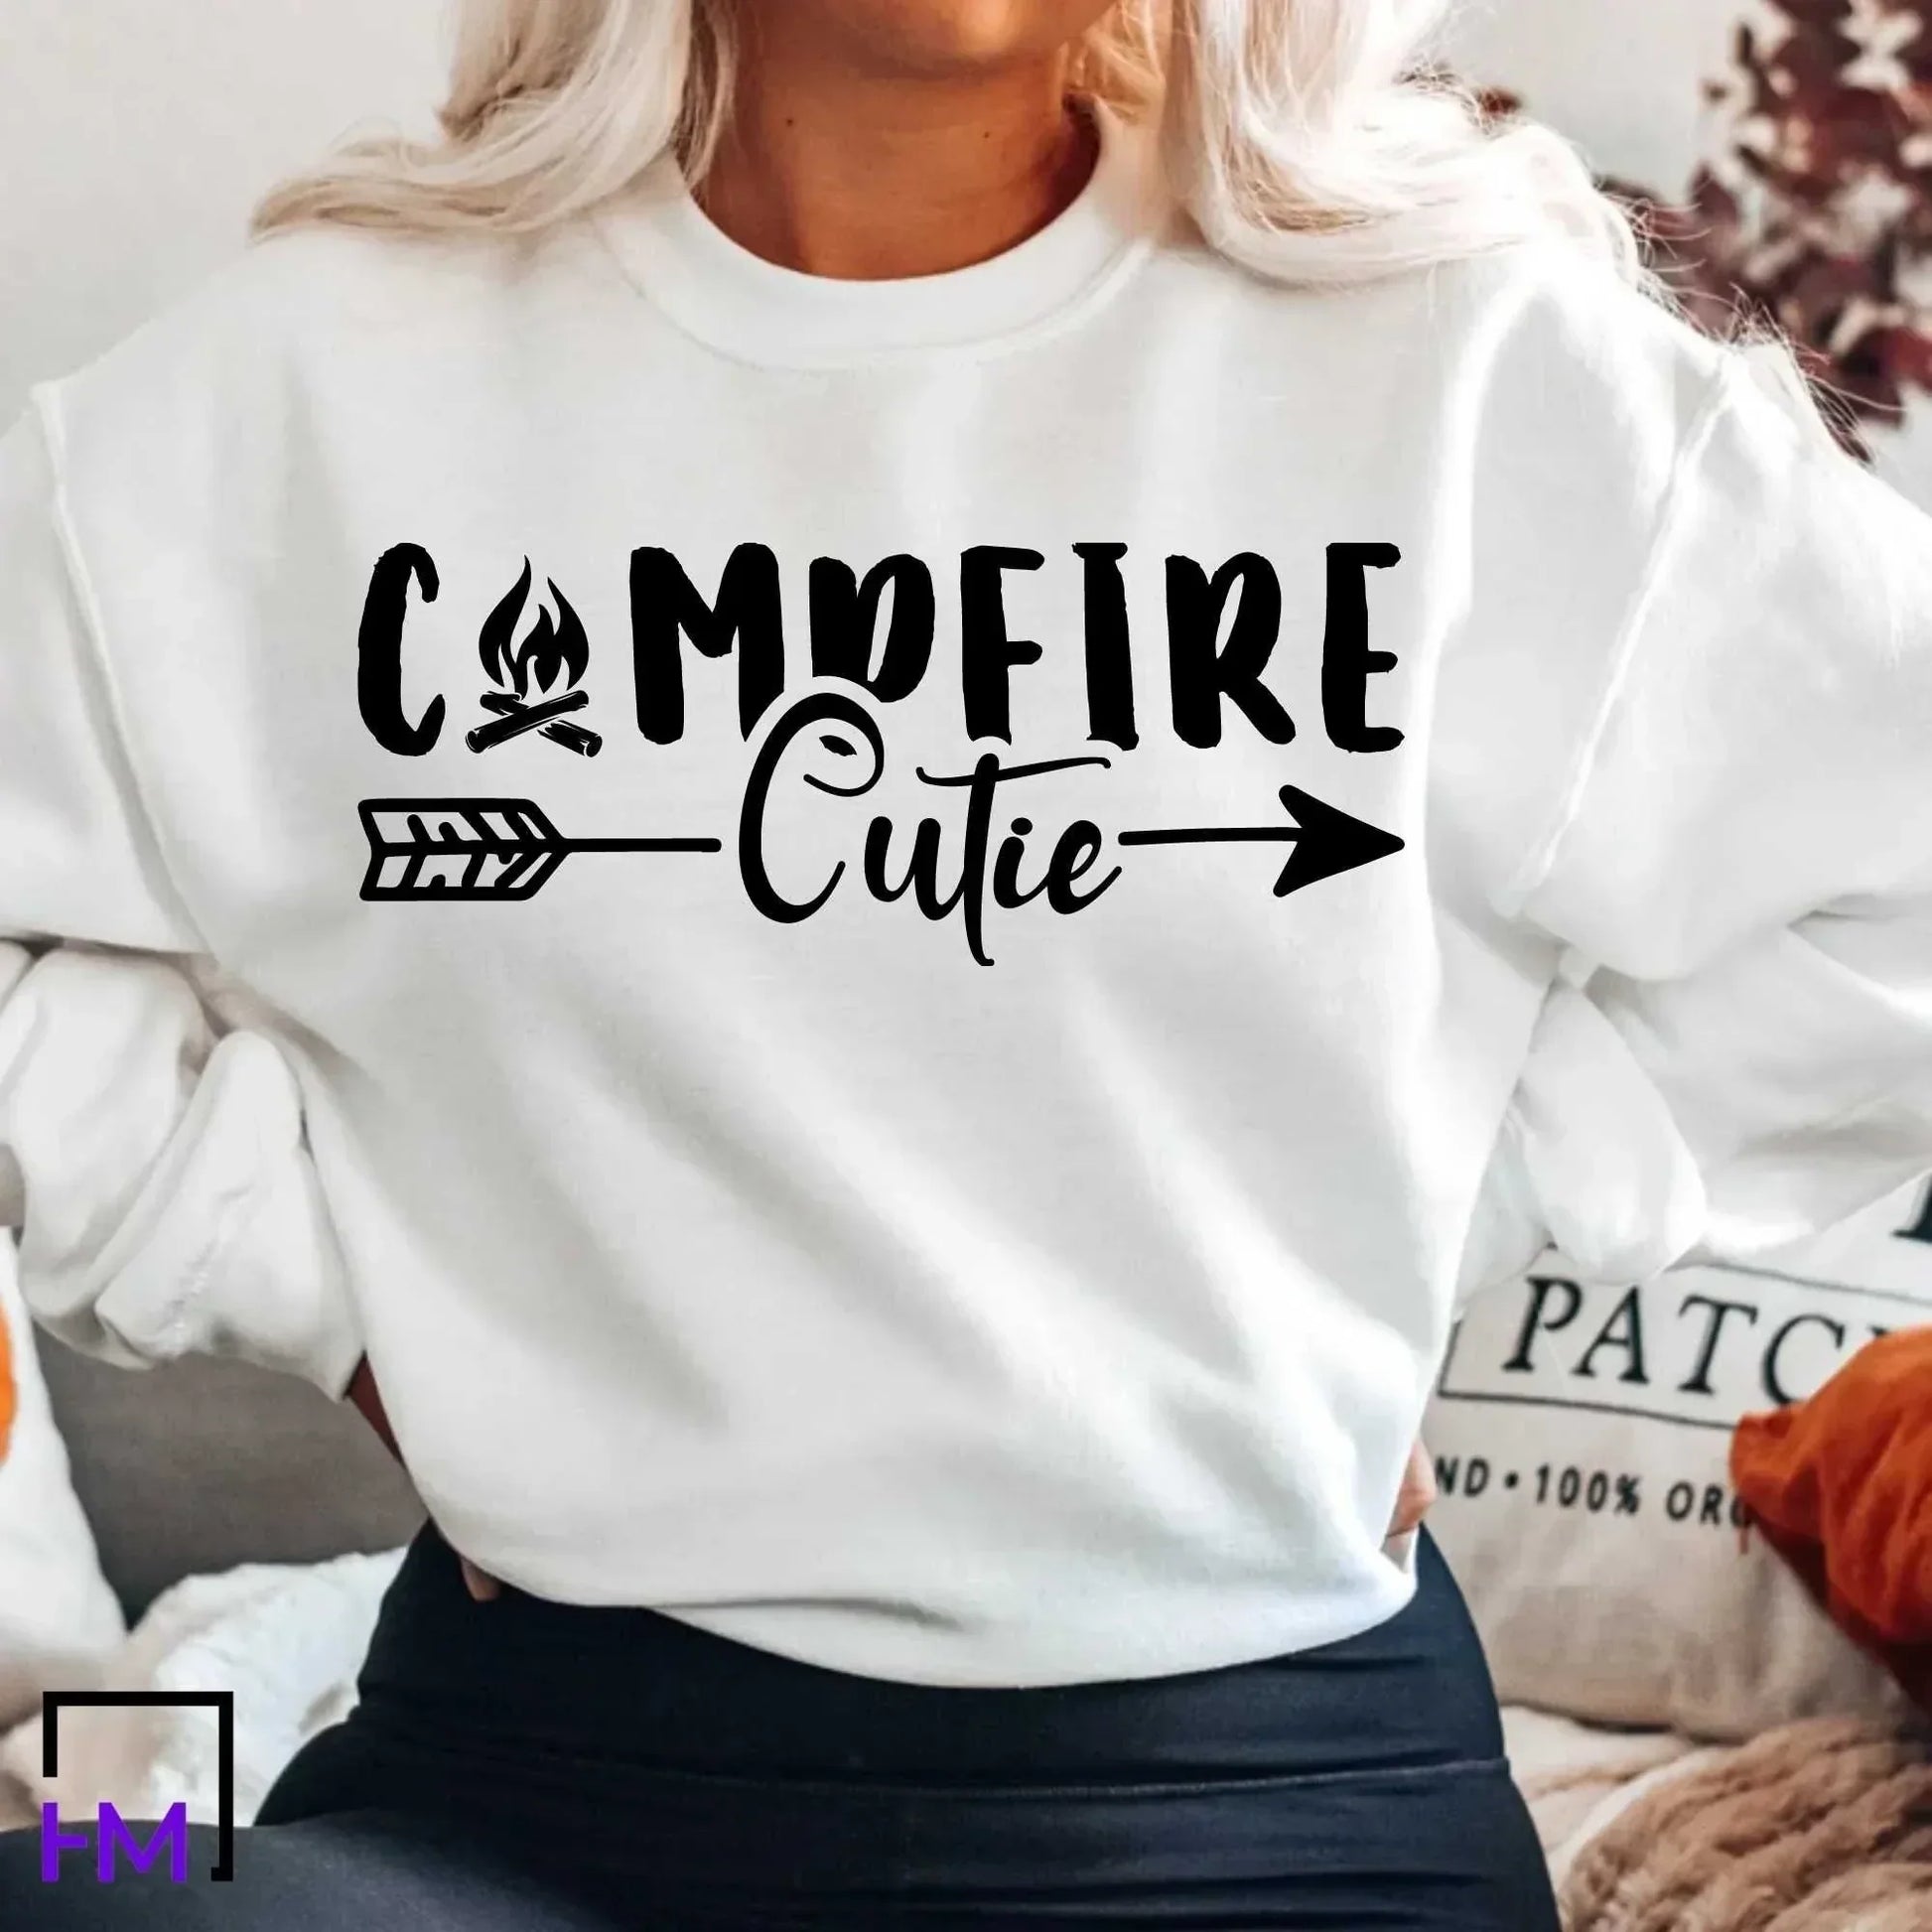 Campfire Cutie, Happy Camper Shirt, Adventure Time Gift, Camper Gifts for Women, Nature Lover Sweatshirt, Camping Presents, Hiking Tee HMDesignStudioUS